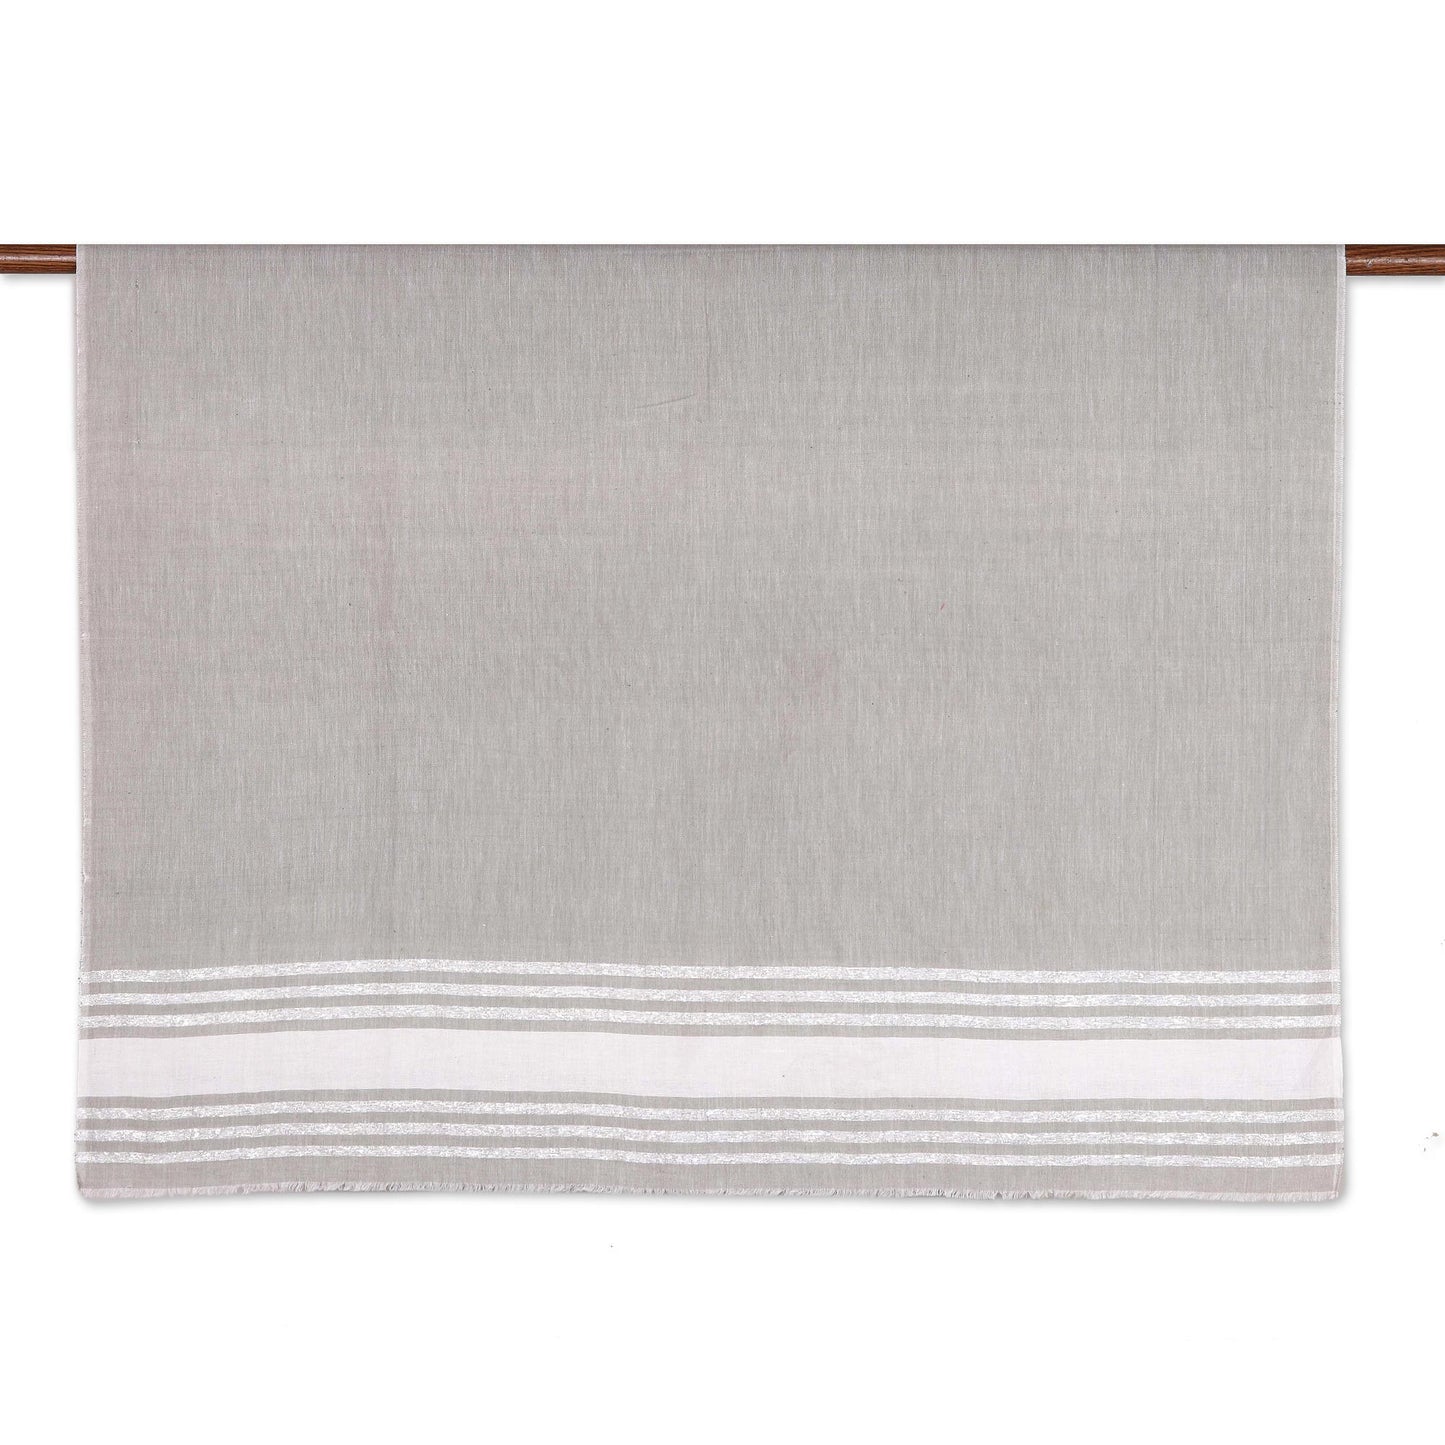 Stylish Stripes in Sage Handwoven Striped Cotton Sarong in Sage from India